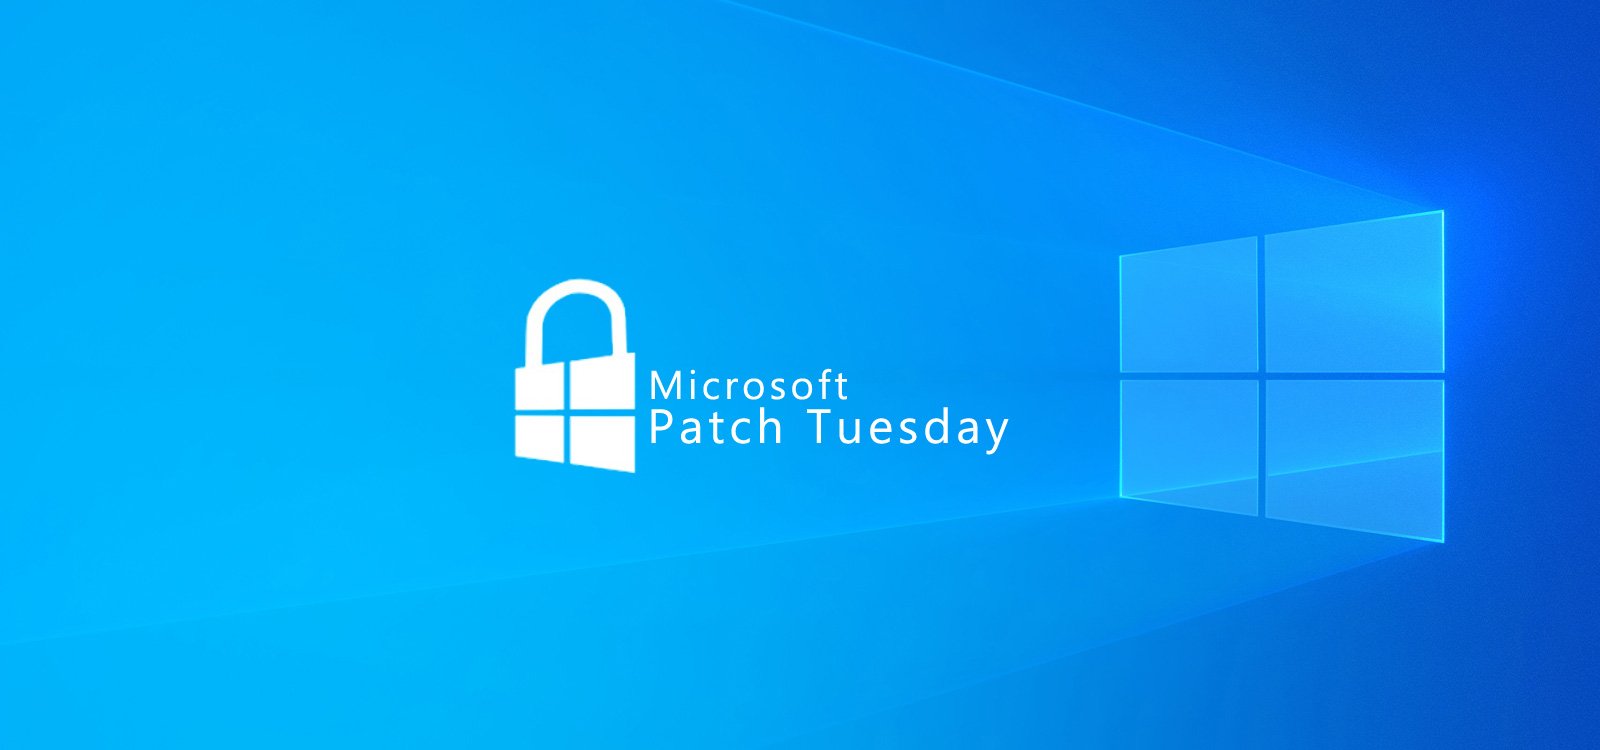 Microsoft August 2020 Patch Tuesday fixes 2 zero-days, 120 flaws